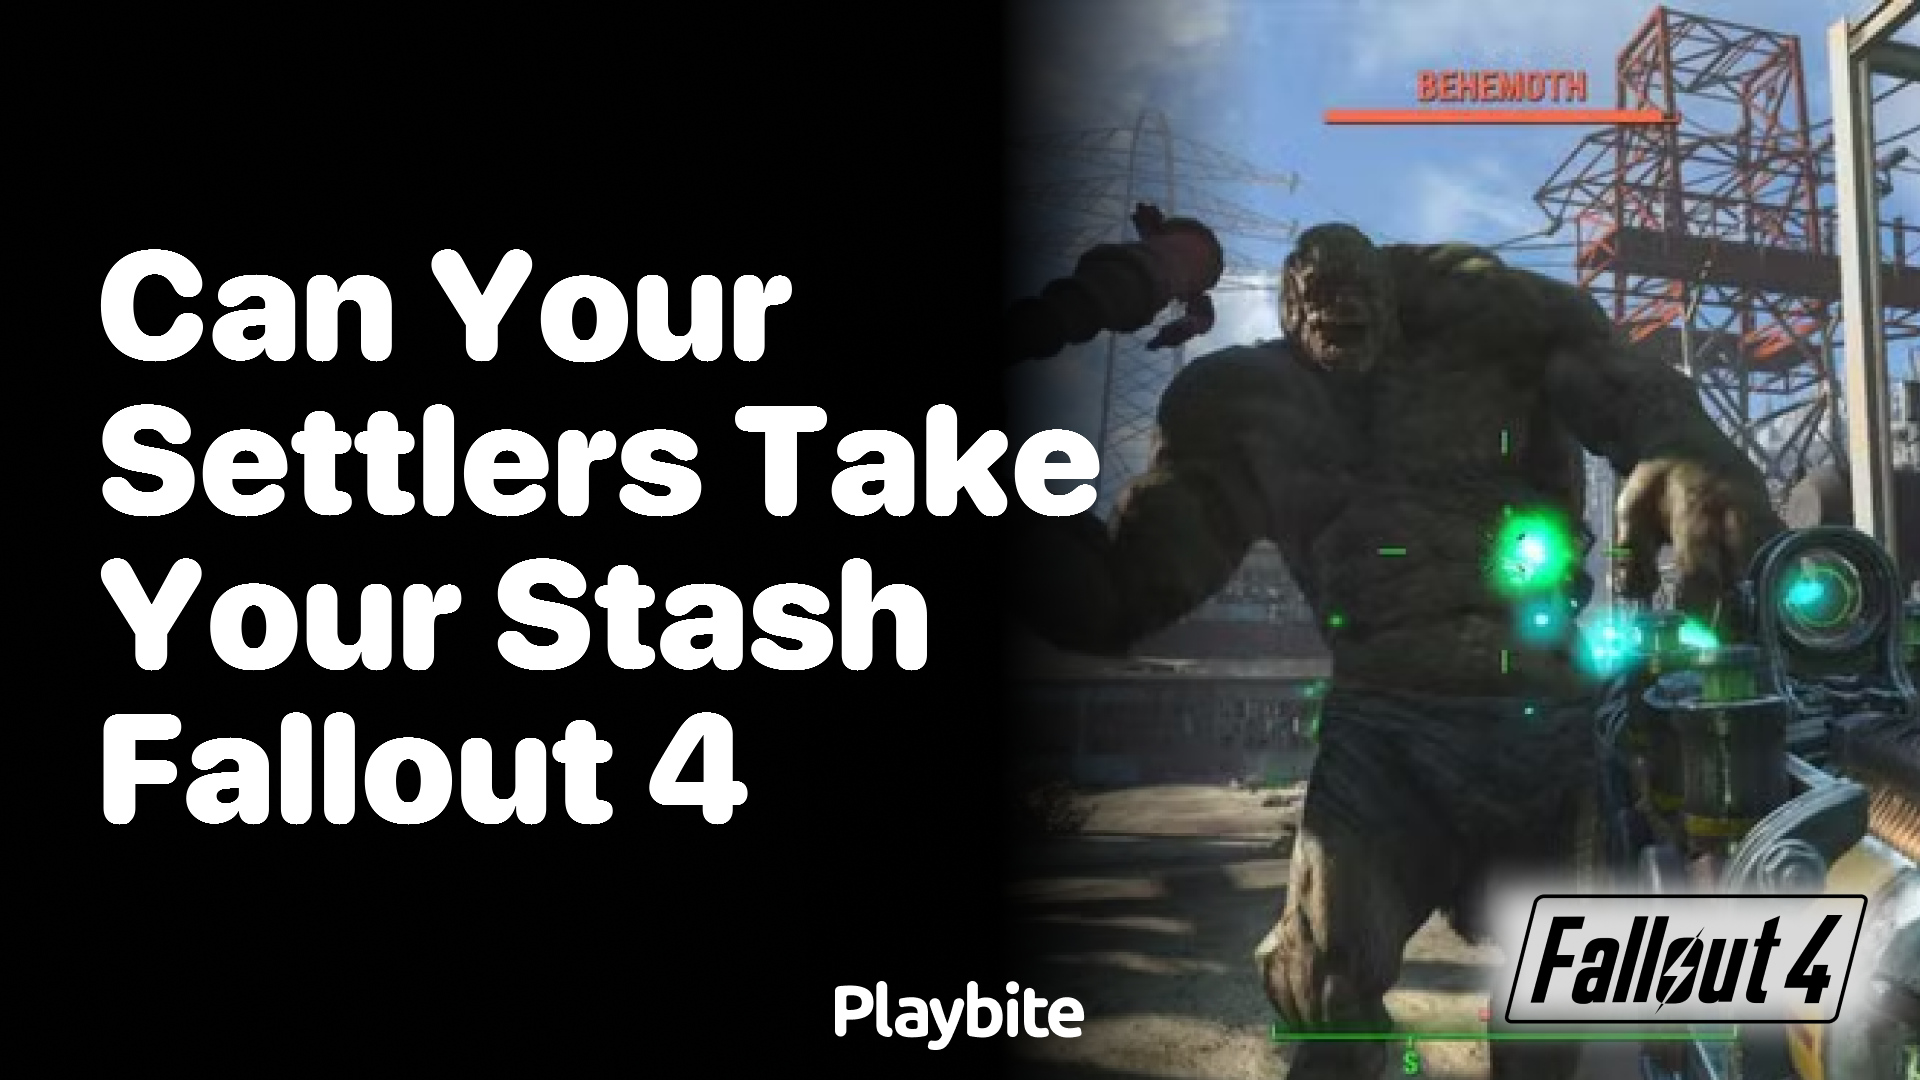 Can your settlers take your stash in Fallout 4?